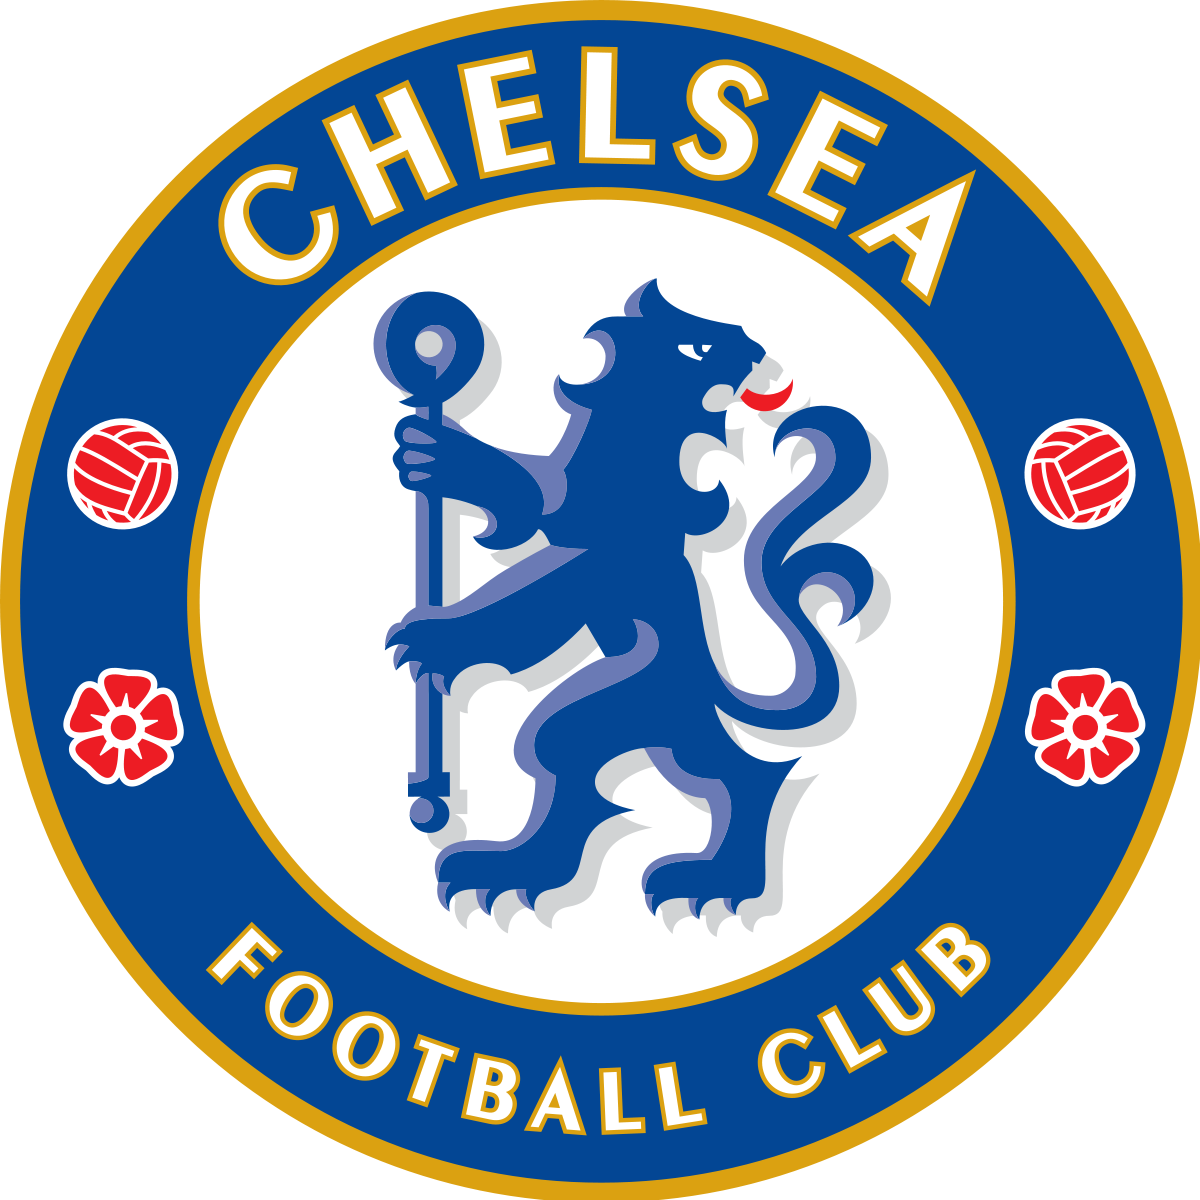 Ff chelsea f.c. lwn malmö The official